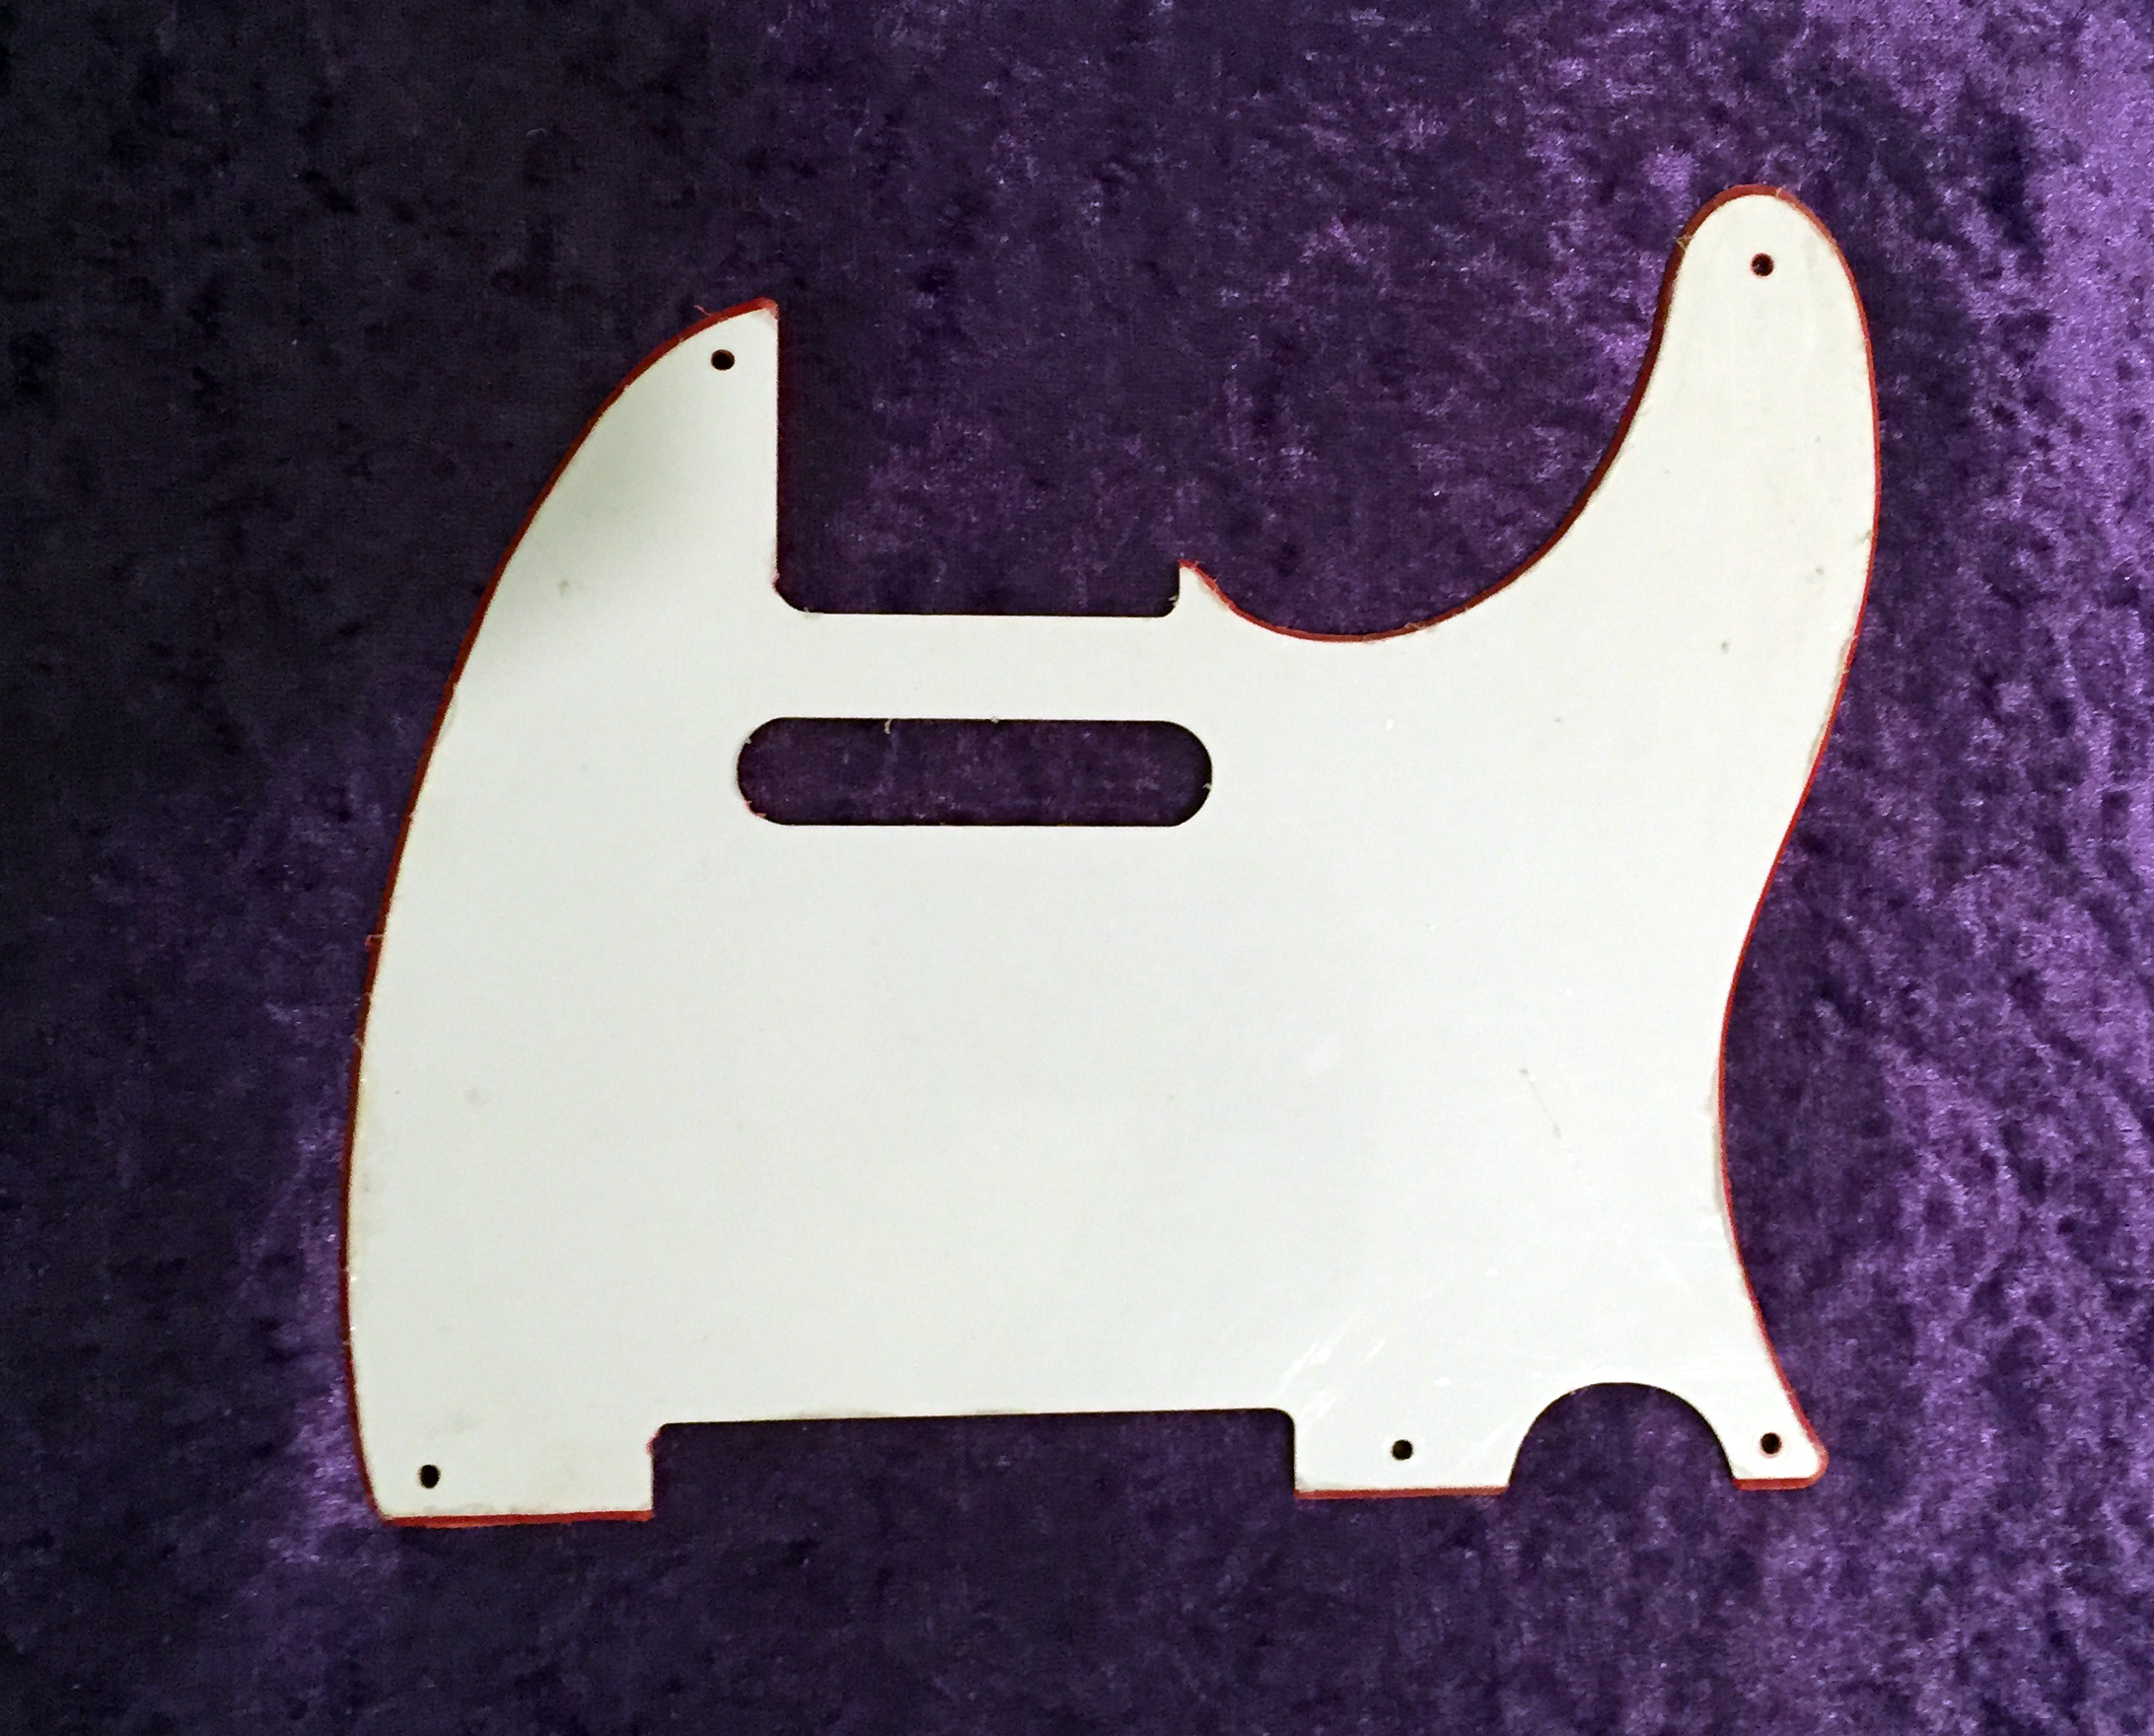 fender all parts wood apw guitars telecaster pickguard stratocaster